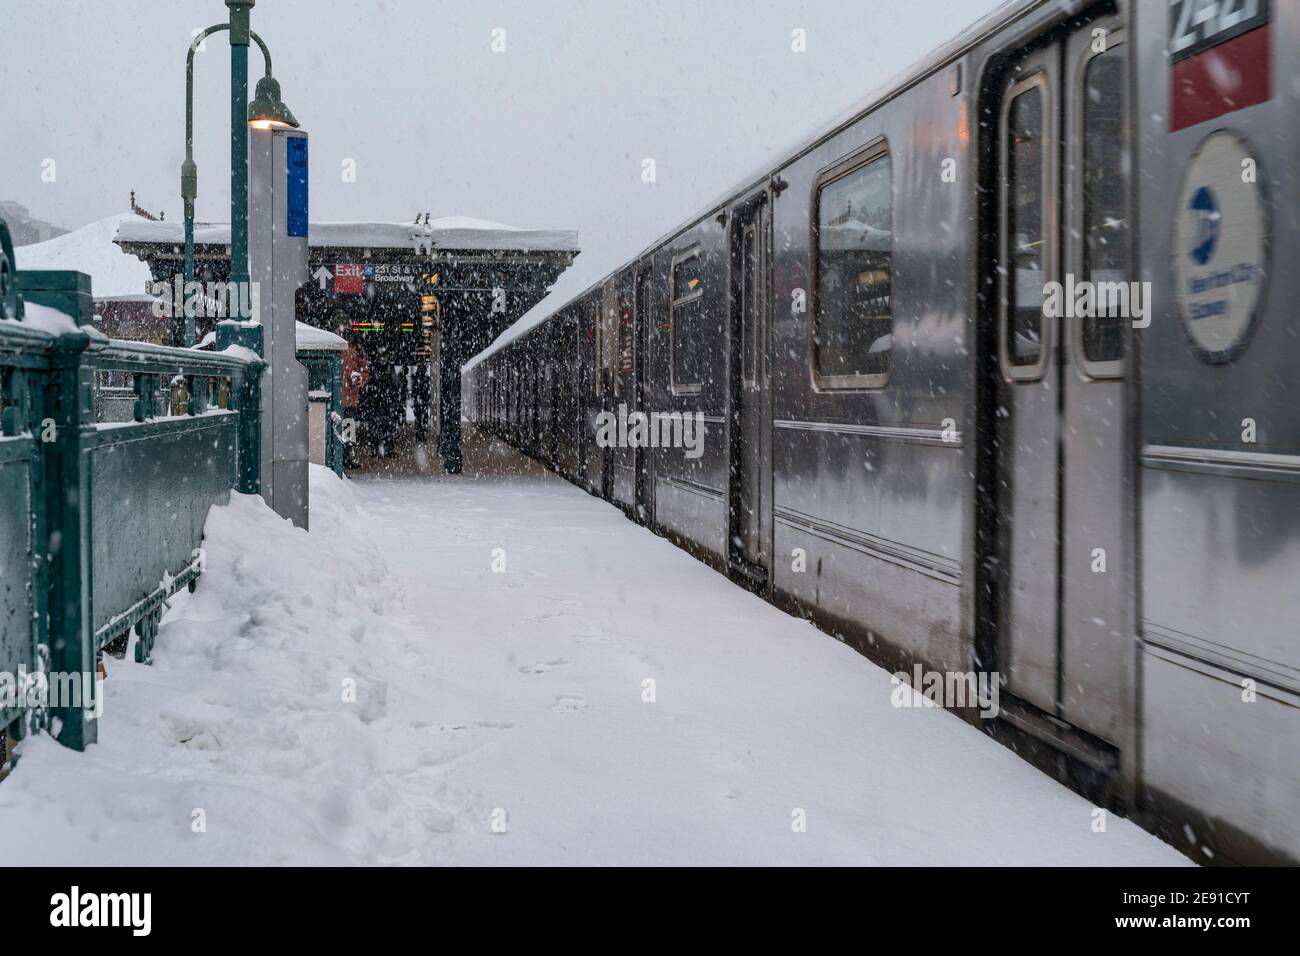 New York, NY - February 1, 2021: View of subway train on elevated above ground station covered with snow as major storm cover New York City with more than a foot expected on the ground Stock Photo